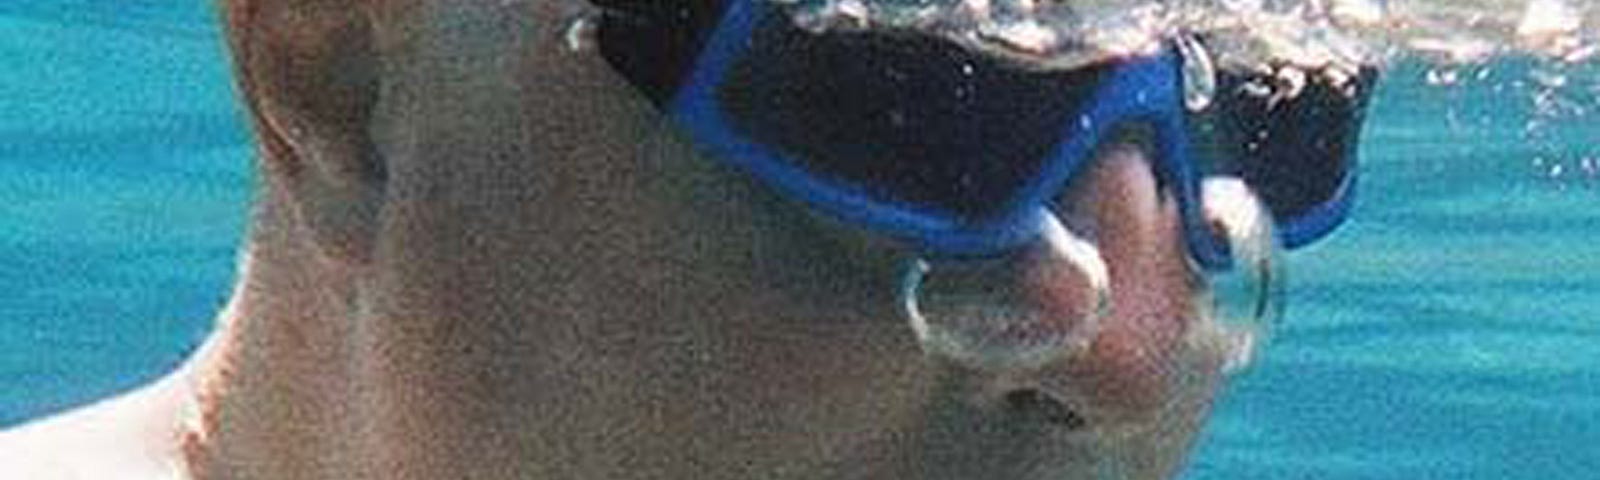 An older man under water in a pool exhales 2 bubbles through his nose.